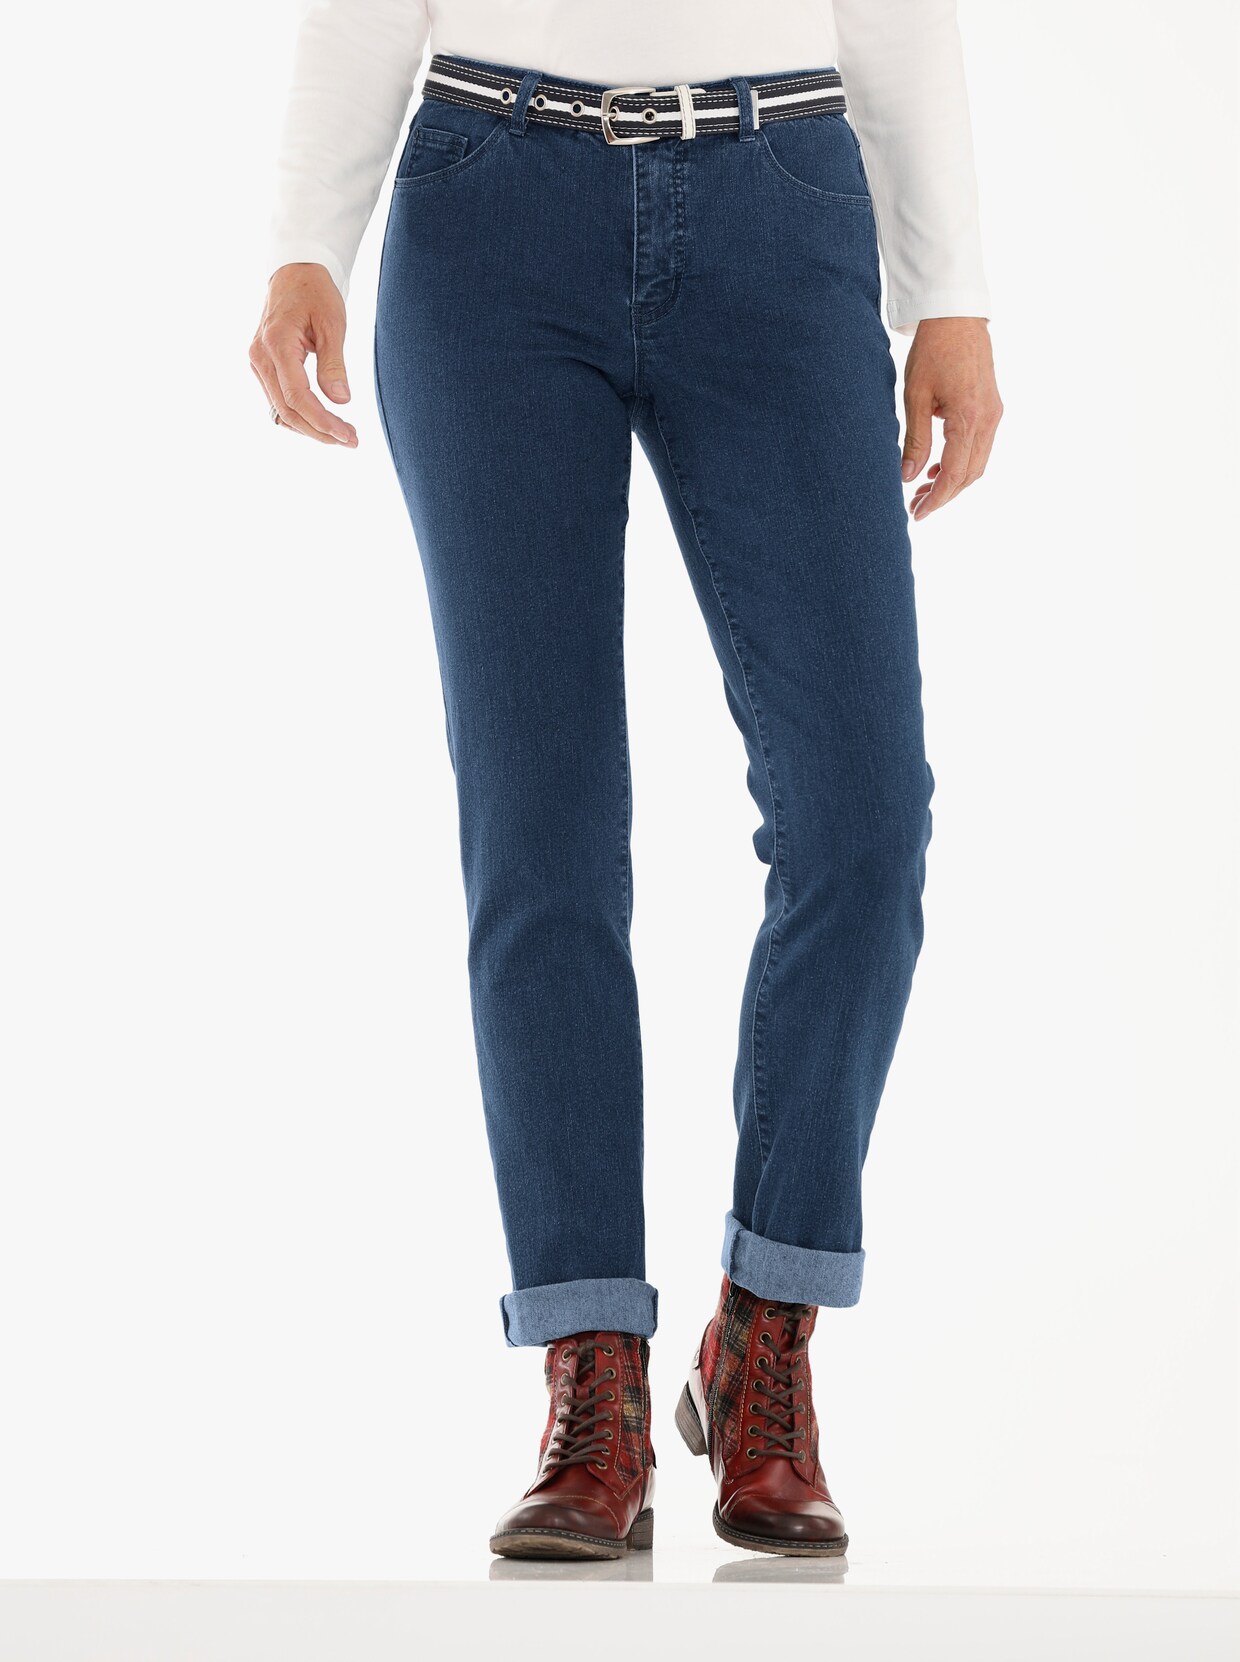 Thermojeans - blue-stone-washed